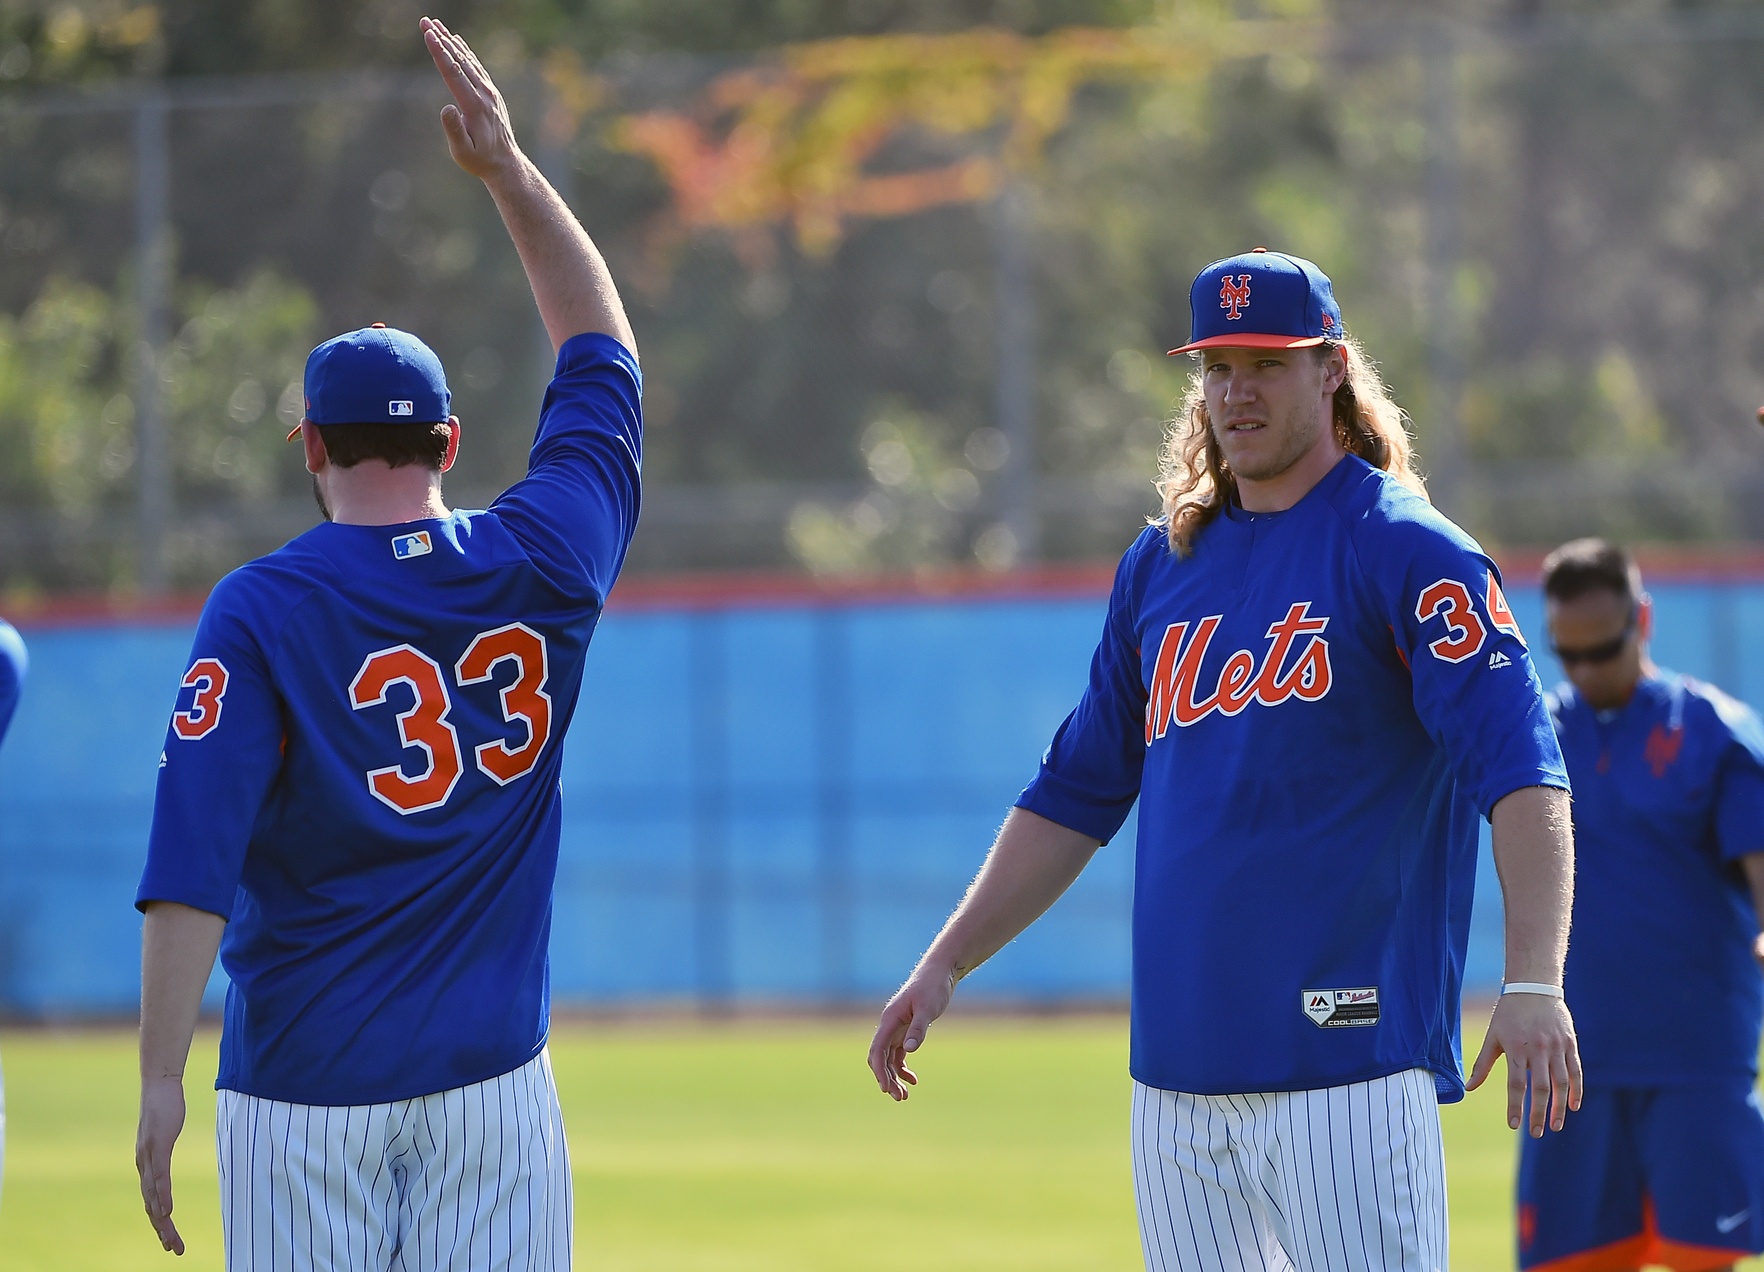 Feb 14, 2017; Port St. Lucie, FL, USA; New York Mets starting pitcher Matt Harvey (33) and starting pitcher Noah Syndergaard (34) stretch during spring training workouts at Tradition Field. Mandatory Credit: Jasen Vinlove-USA TODAY Sports